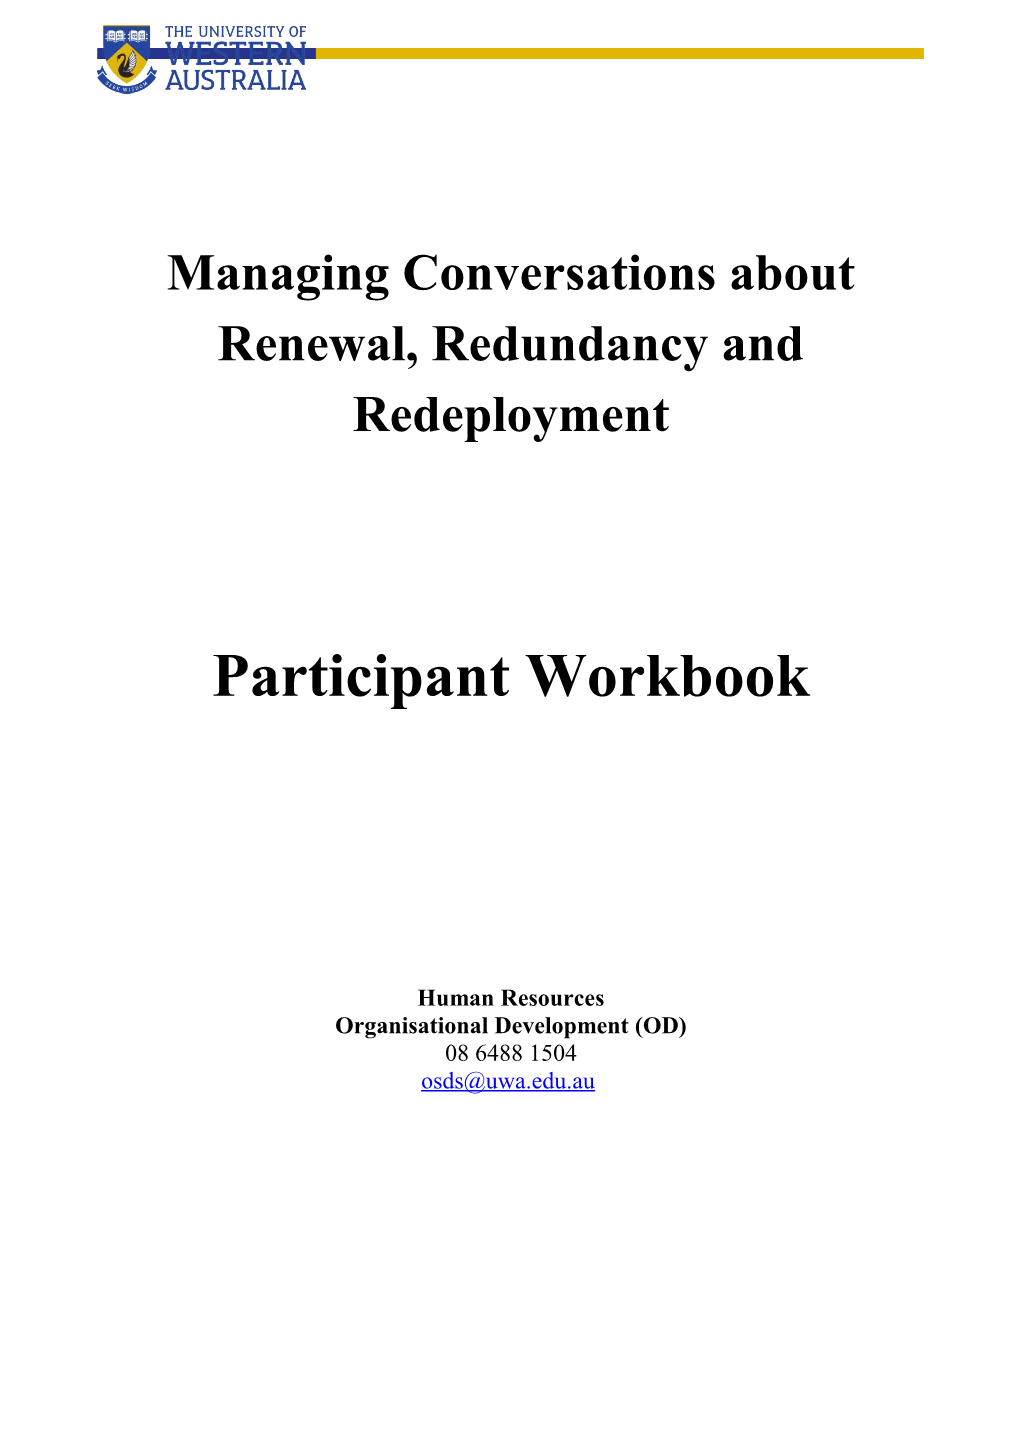 Managing Conversations About Renewal, Redundancy and Redeployment